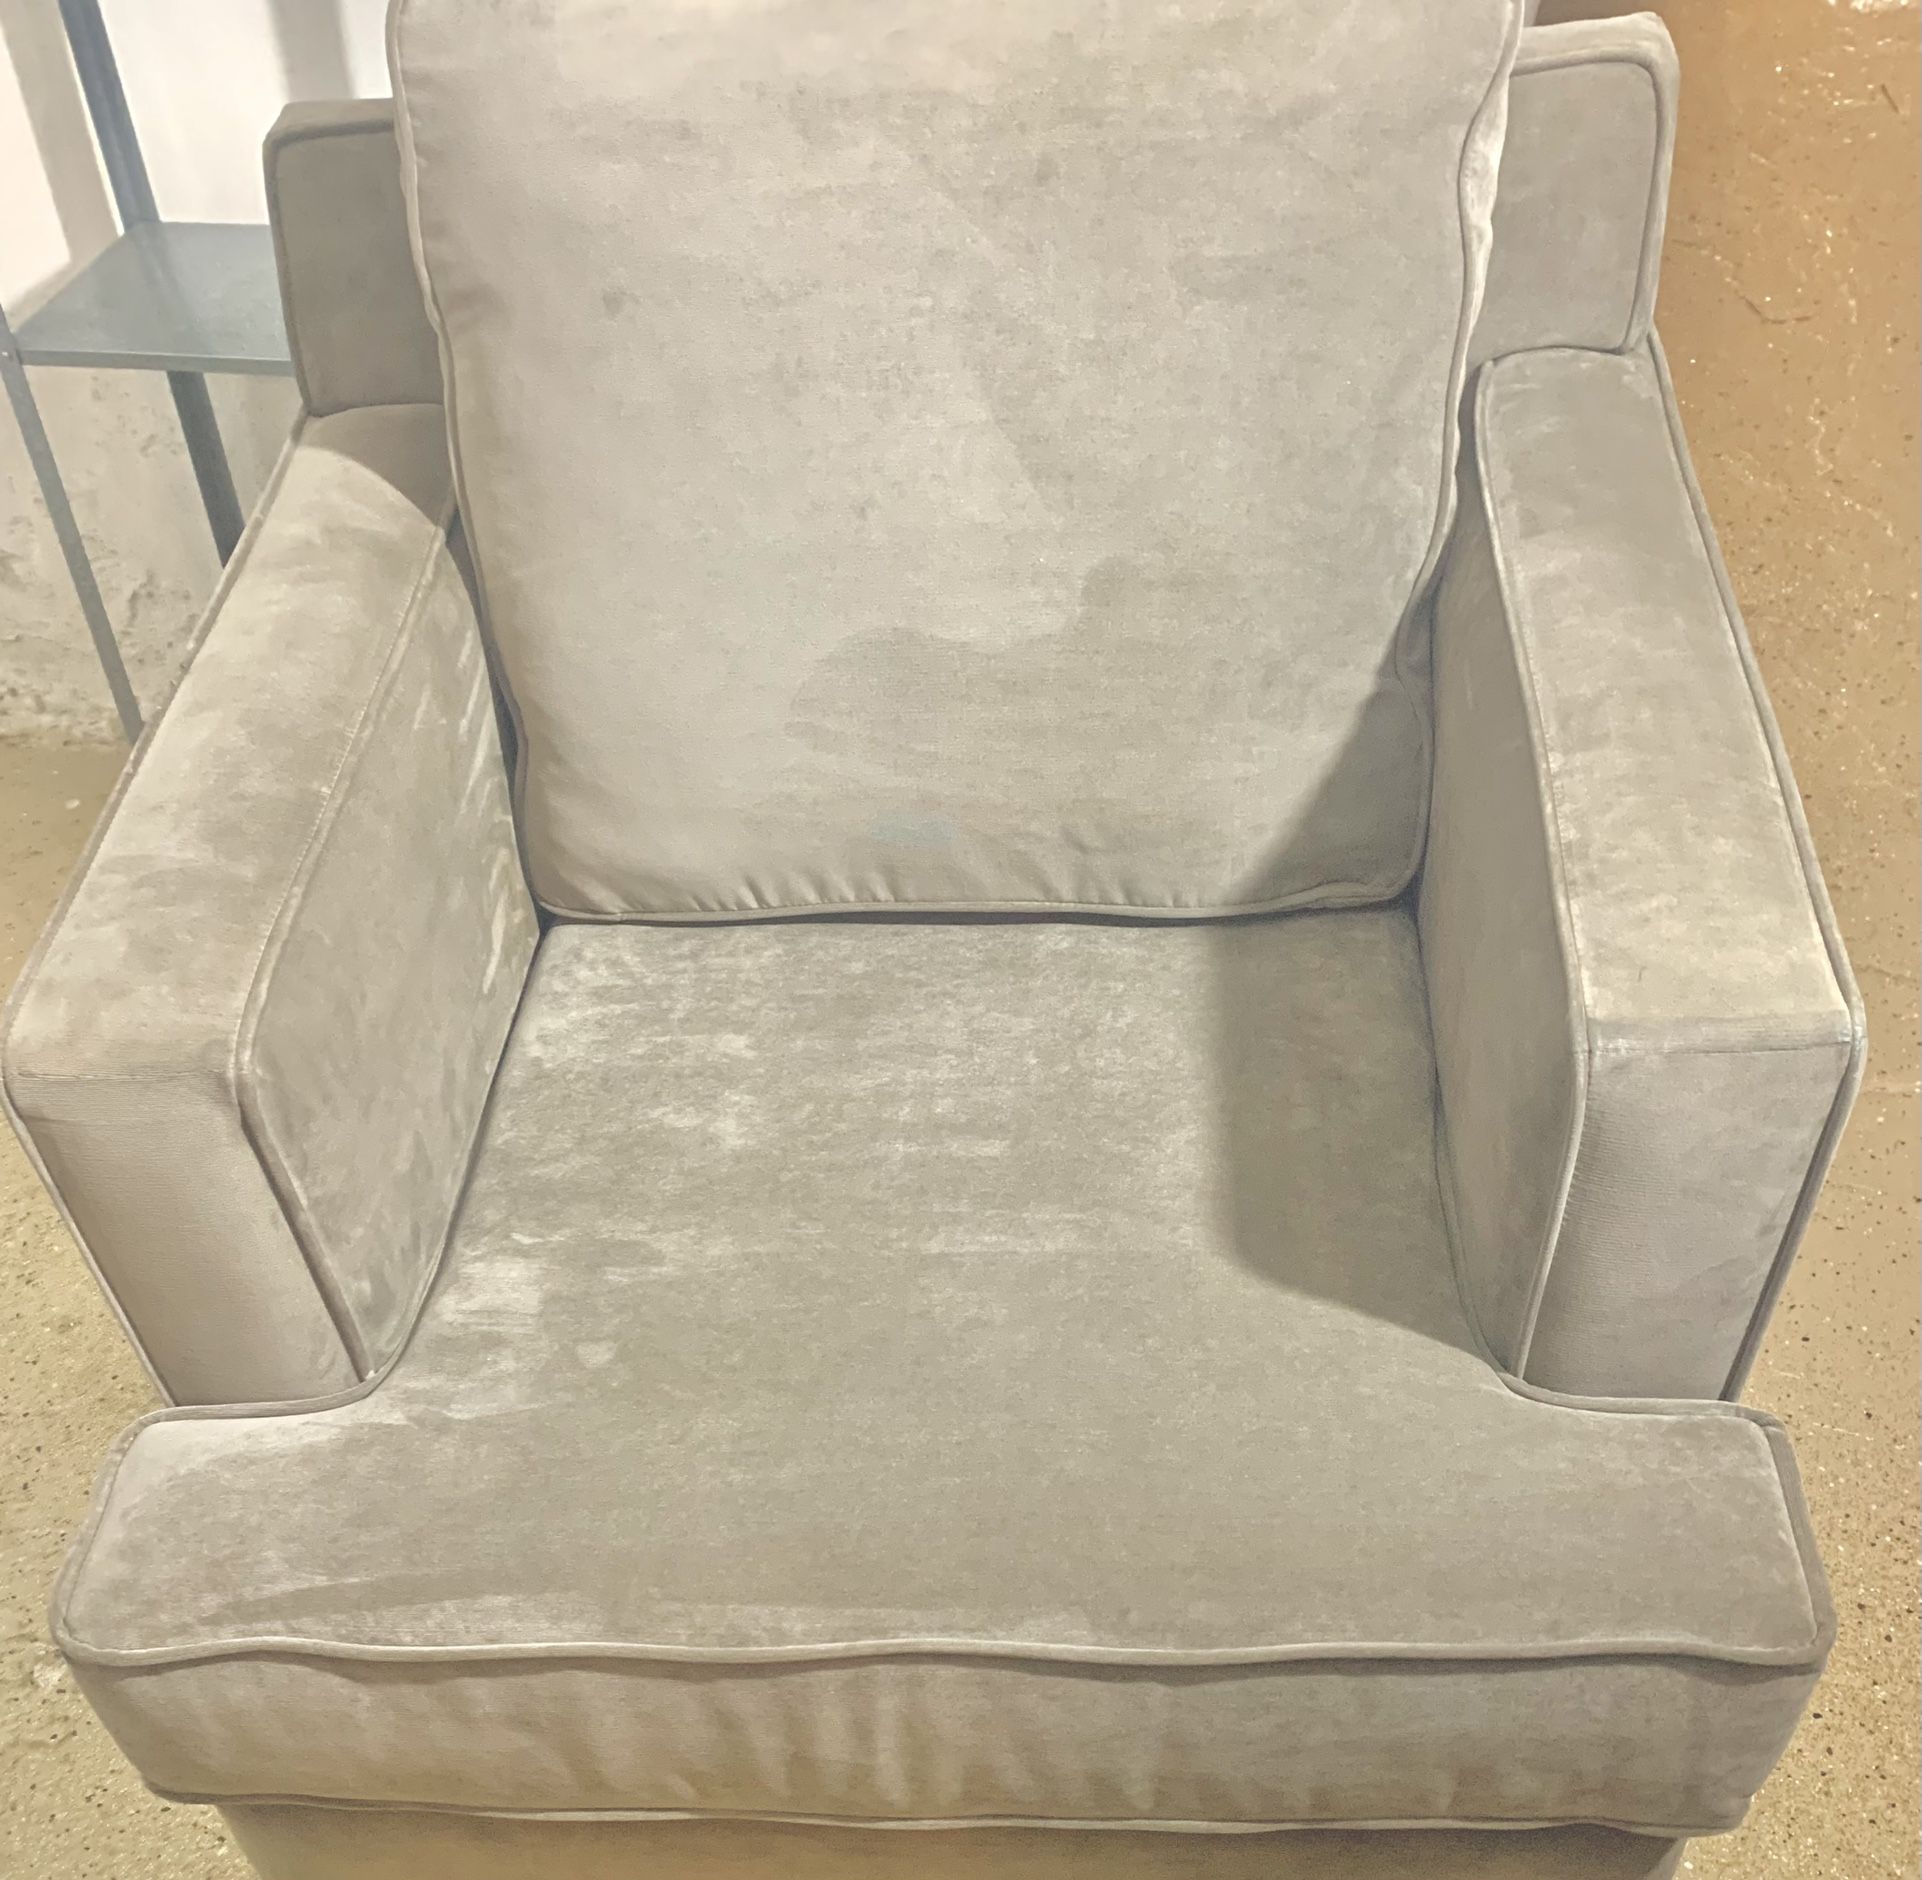 PENDING PICKUP NEW GRAY ACCENT CHAIR